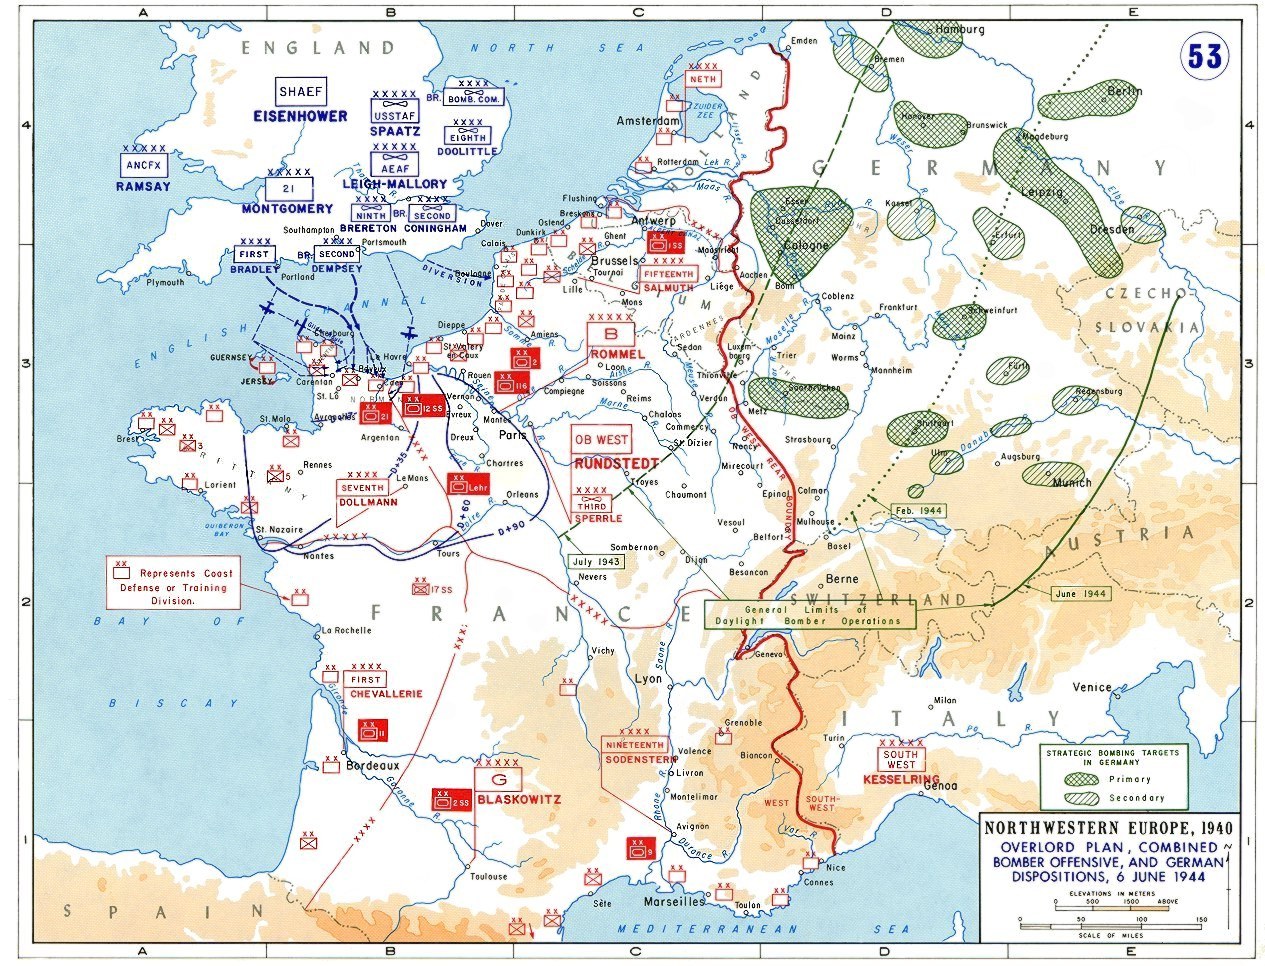 Map Map depicting Allied bomber offensive plans in the Normandy